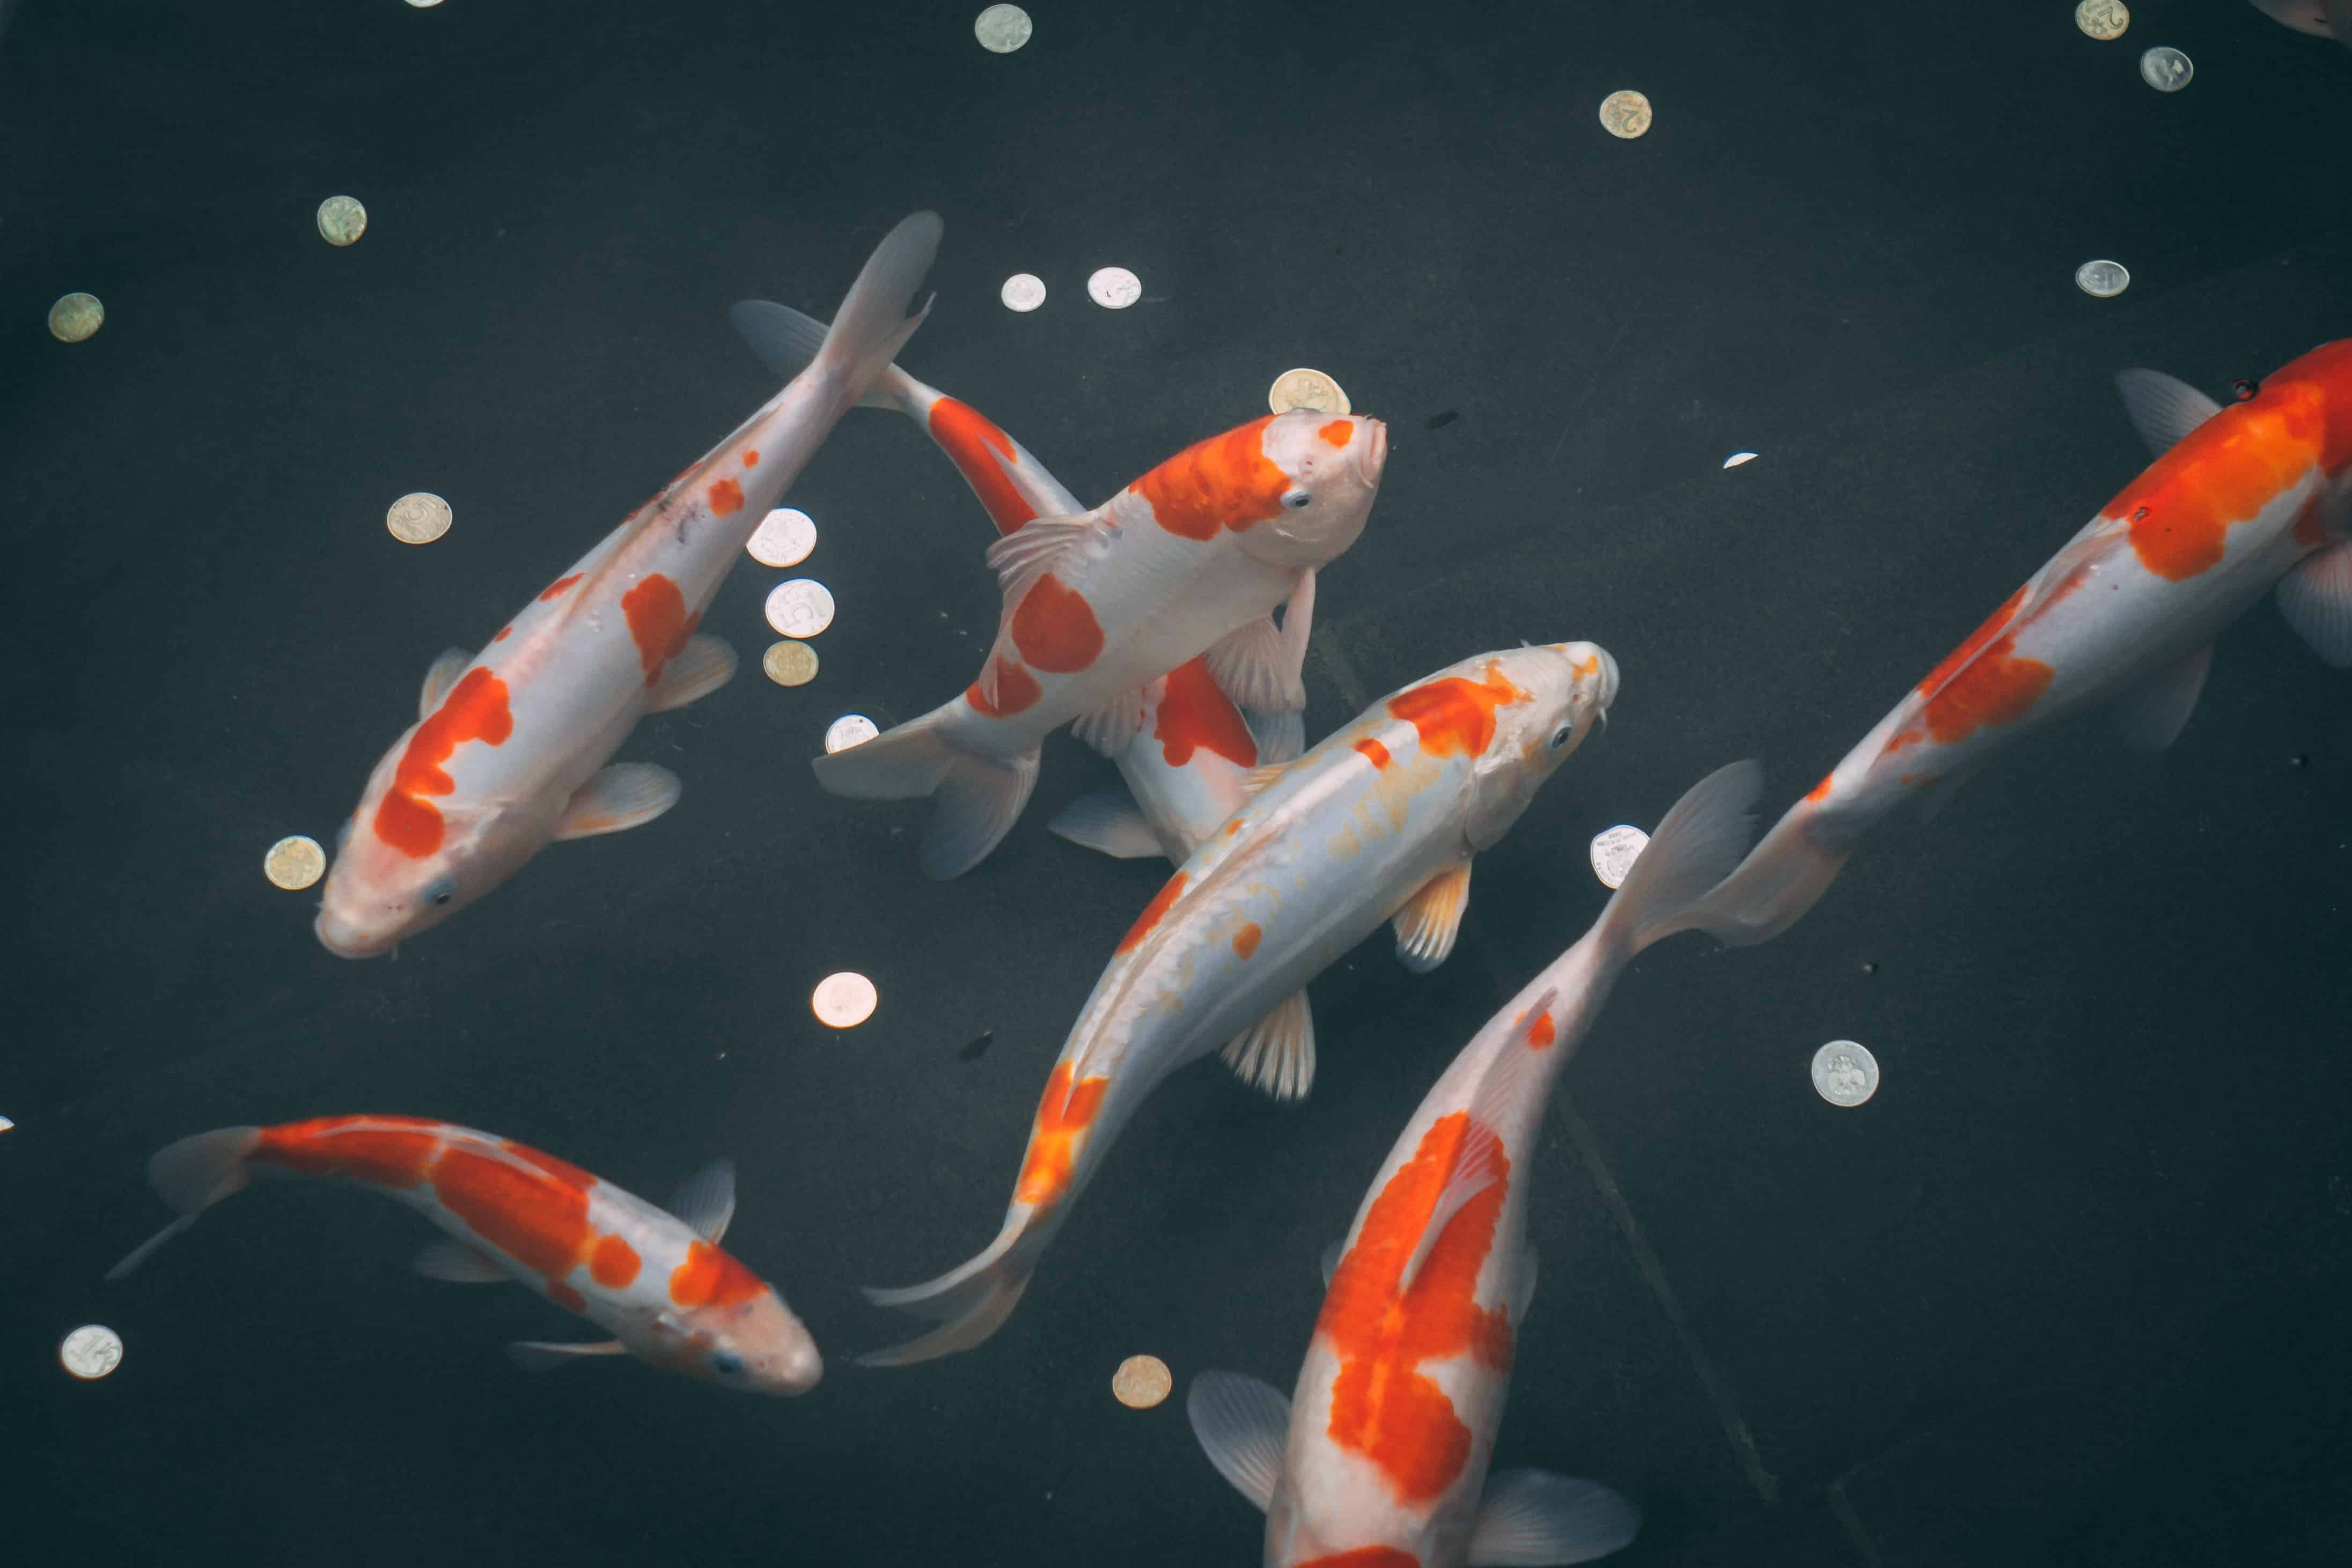 5 Facts About Koi Fish